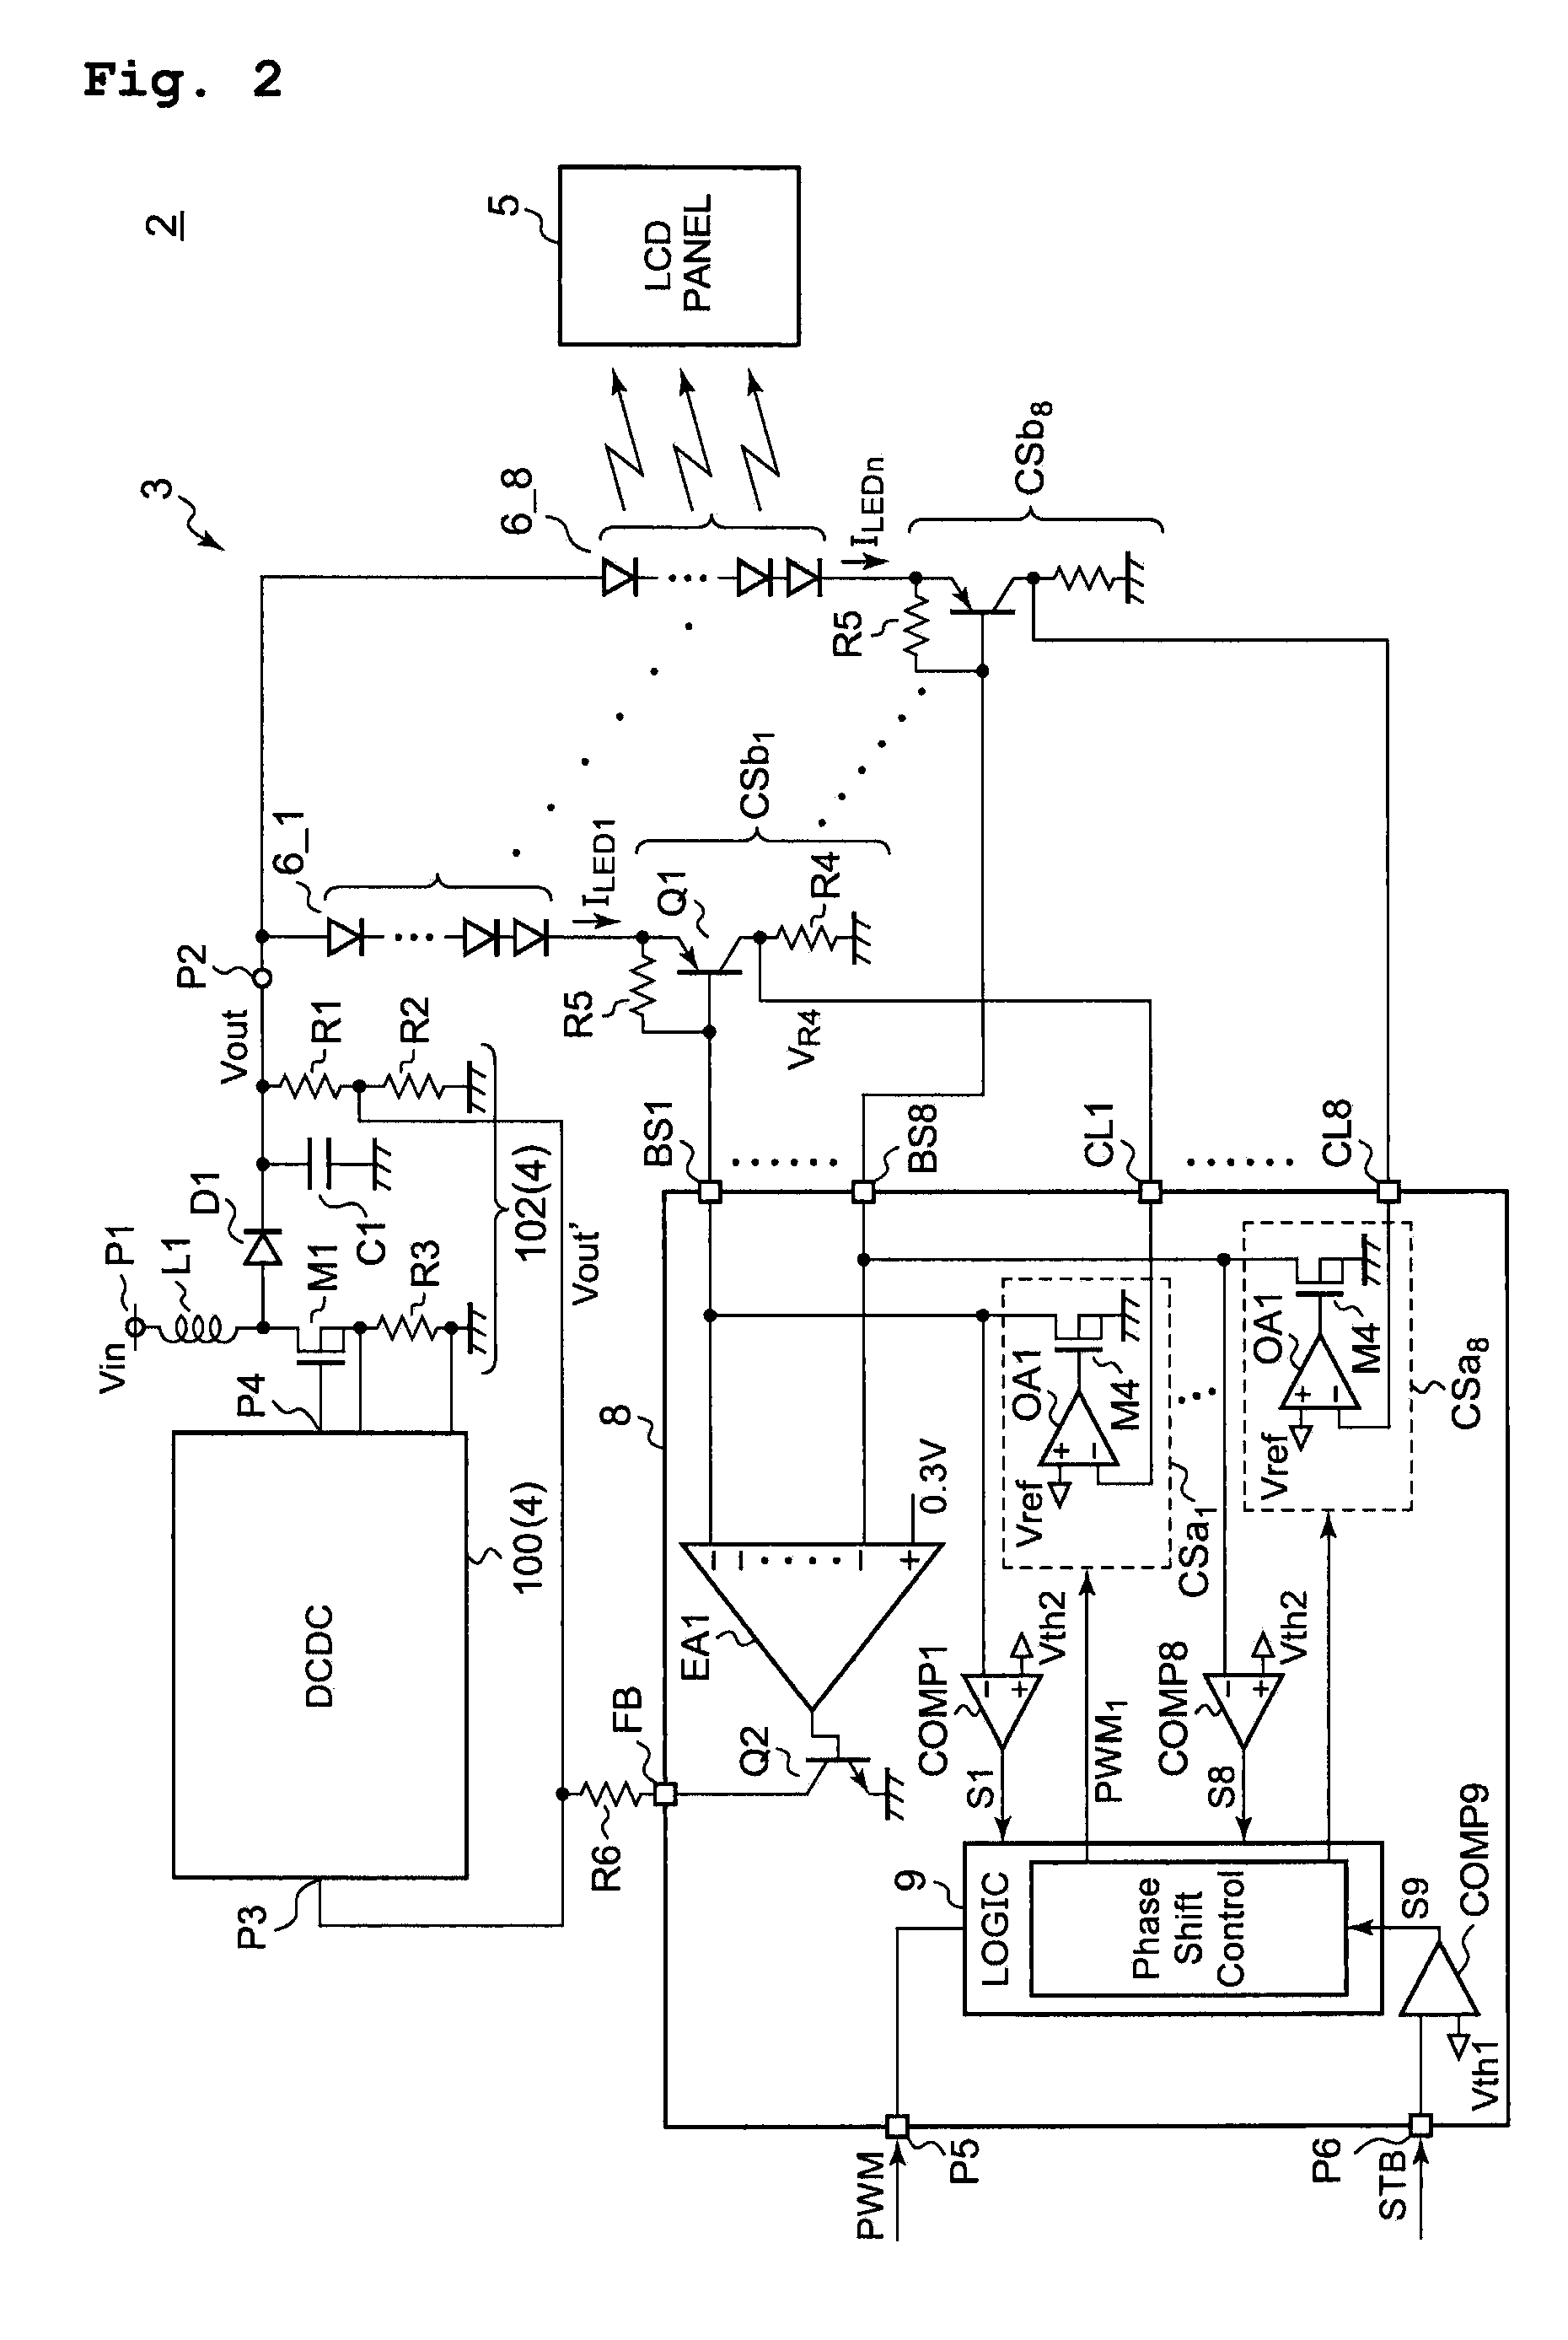 Current drive circuit for light emitting diode